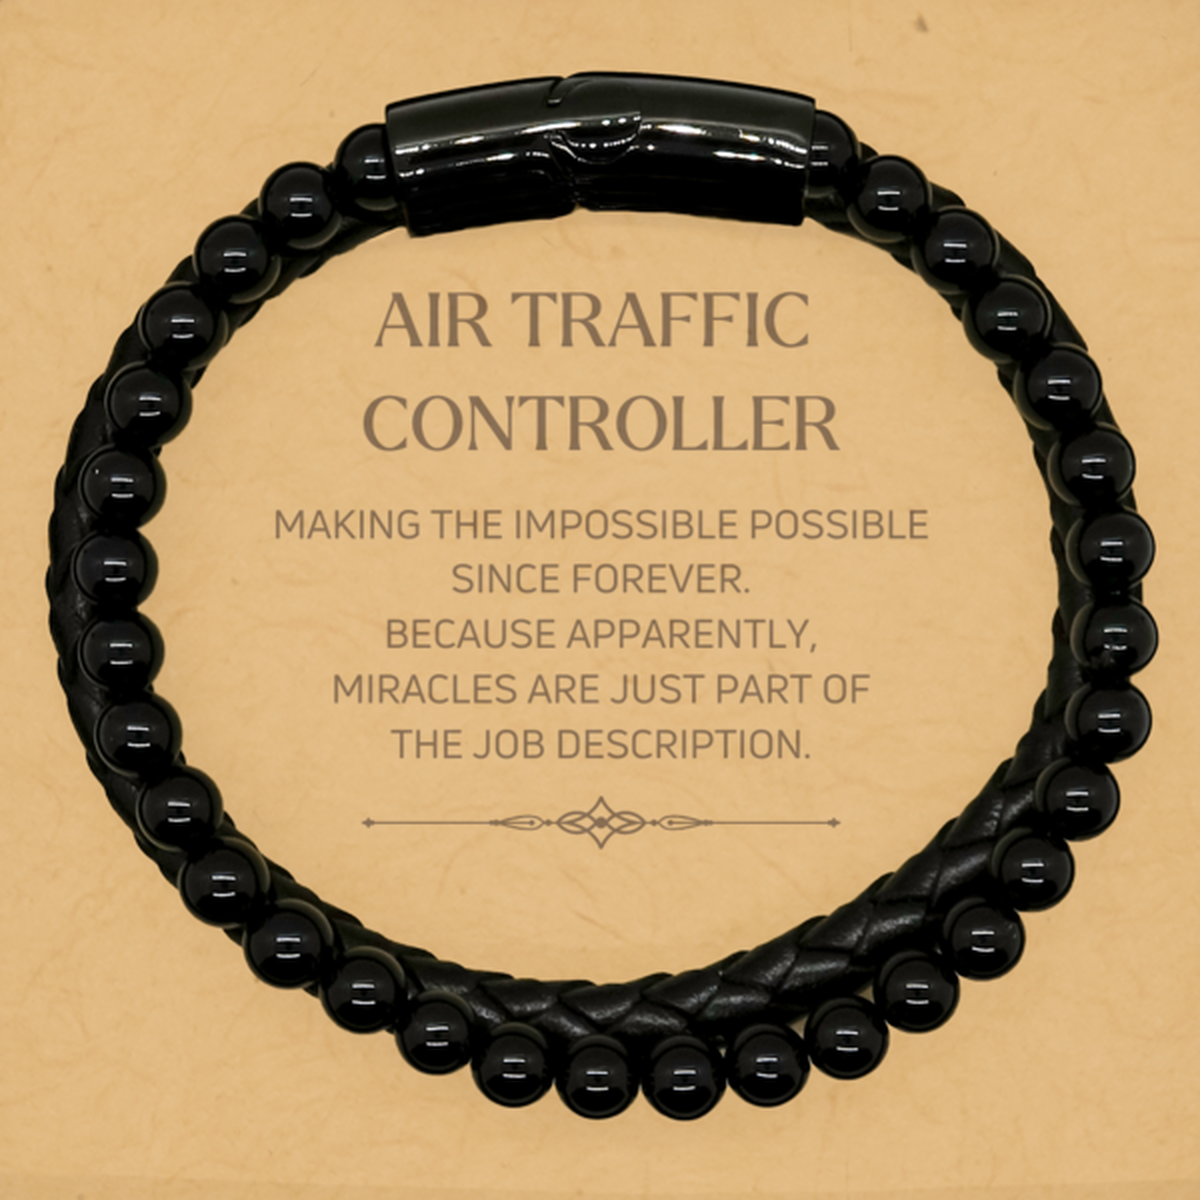 Funny Air Traffic Controller Gifts, Miracles are just part of the job description, Inspirational Birthday Stone Leather Bracelets For Air Traffic Controller, Men, Women, Coworkers, Friends, Boss